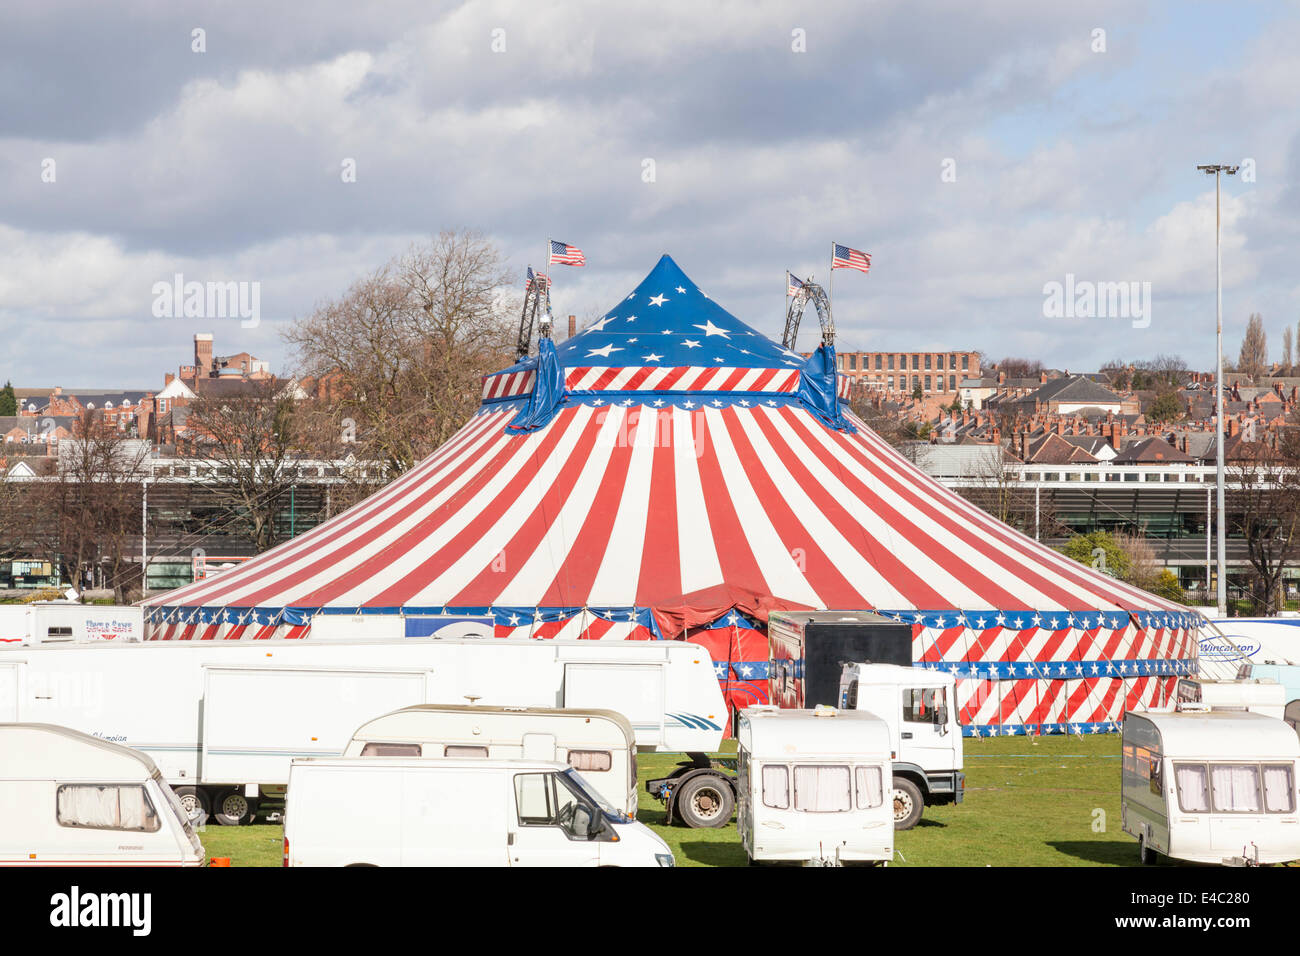 Uncle Sam's American Circus big top and vehicles in a city park with housing in the distance. Nottingham, England, UK Stock Photo